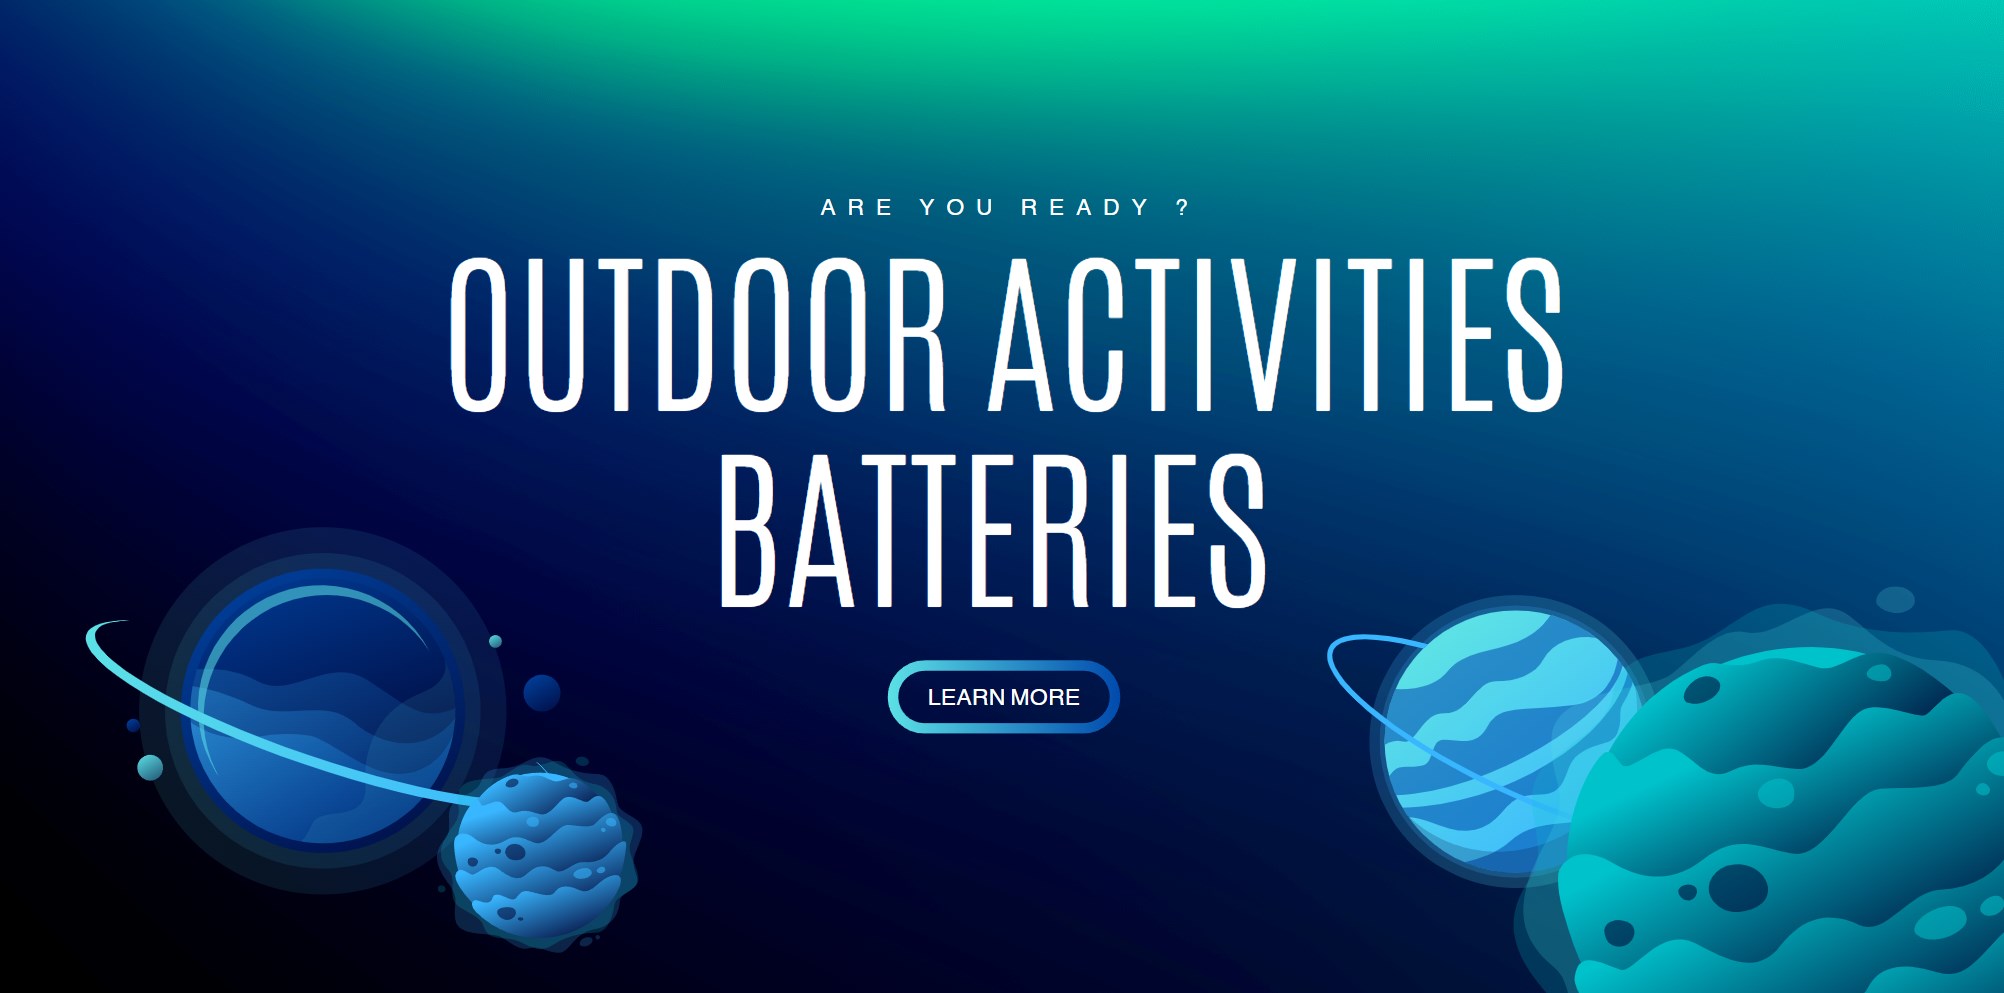 How to Choose Right Batteries for Outdoor Activities